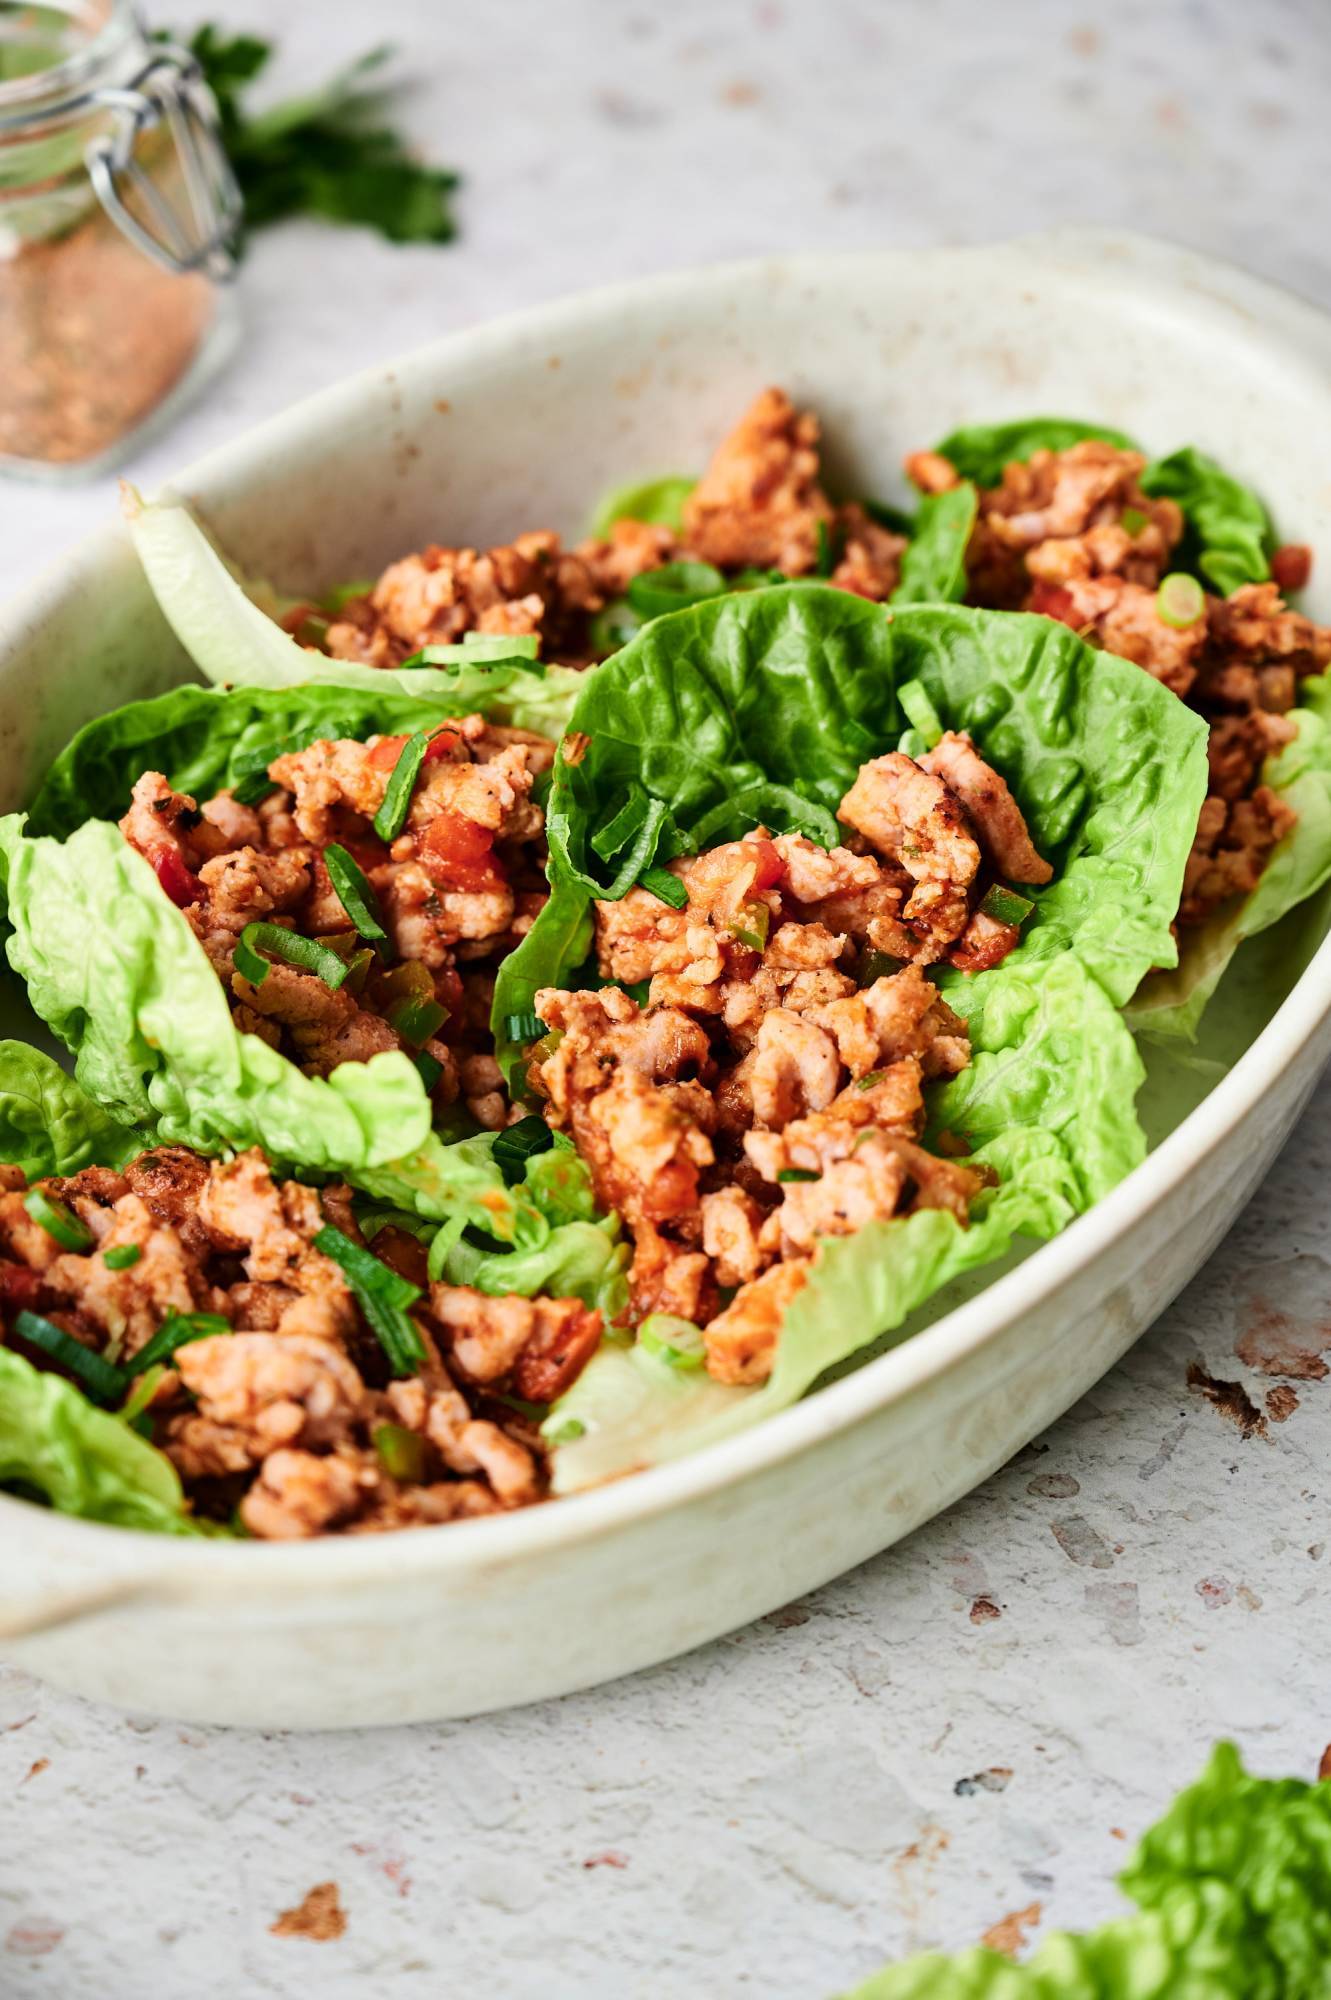 Taco lettuce wraps with ground turkey, tomatoes, cilantro, and green onions served in butter lettuce leaves.